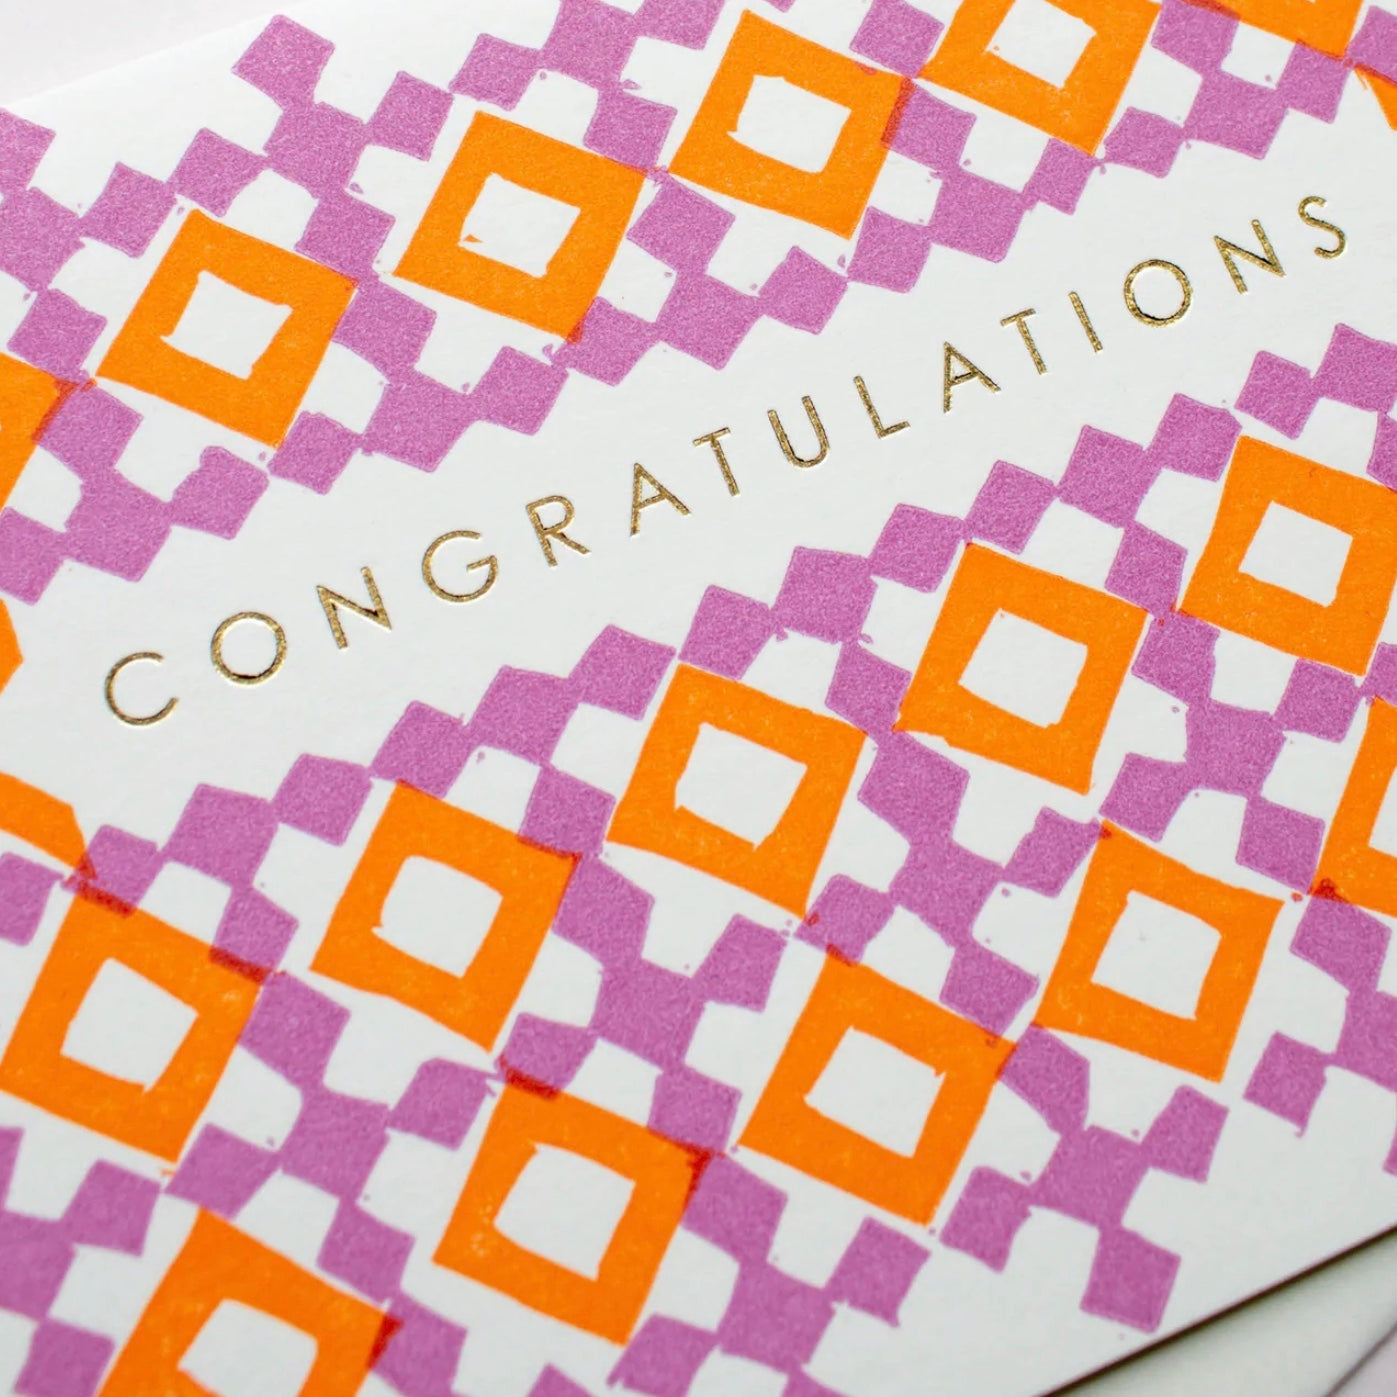 congratulations card with pink and orange tones